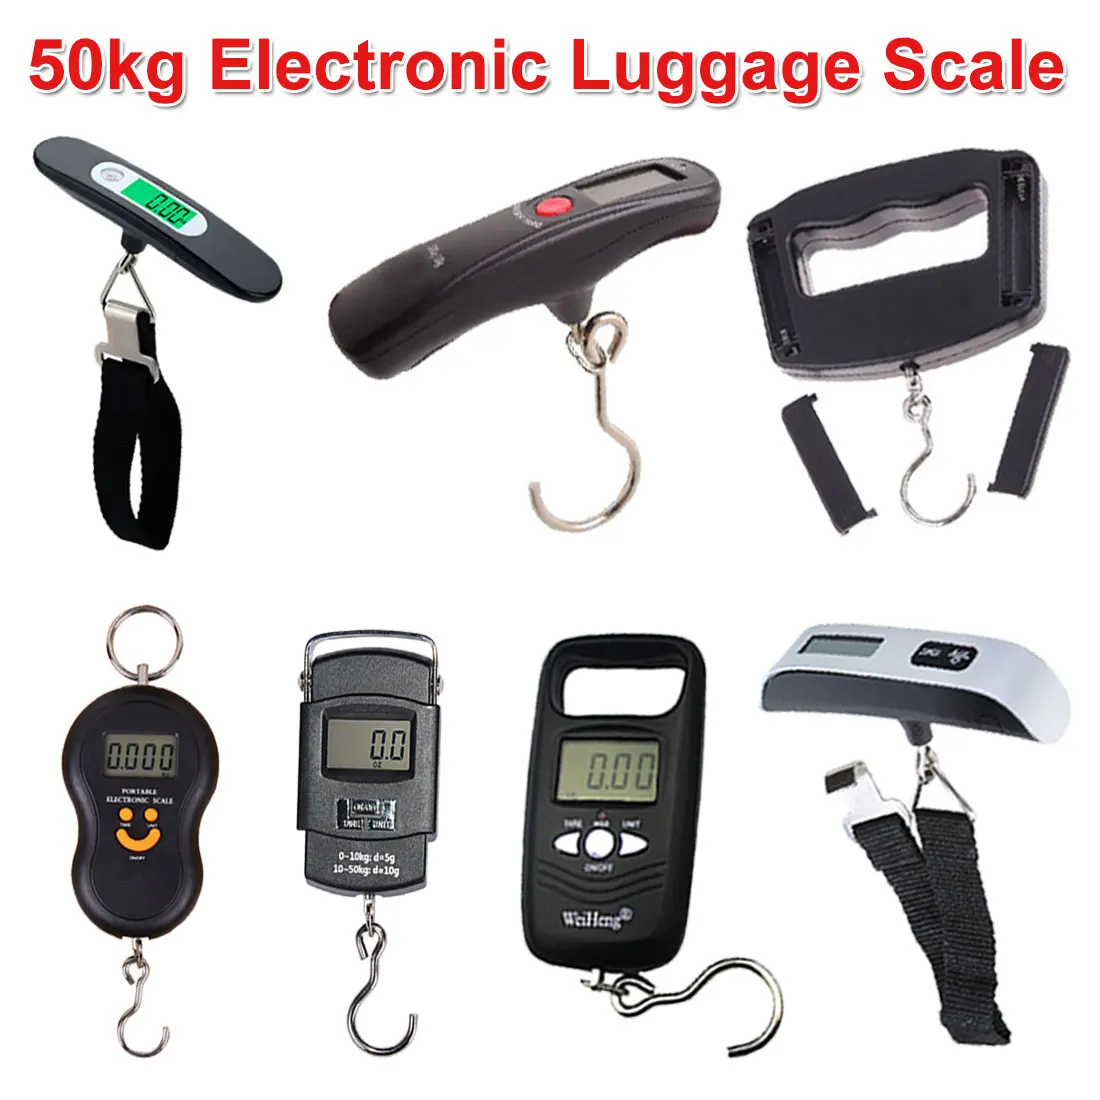 

Fish Hook Hanging Scale 50kg/110lb Digital Electronic Luggage Scale Portable Suitcase Scale Handled Travel Bag Weighting